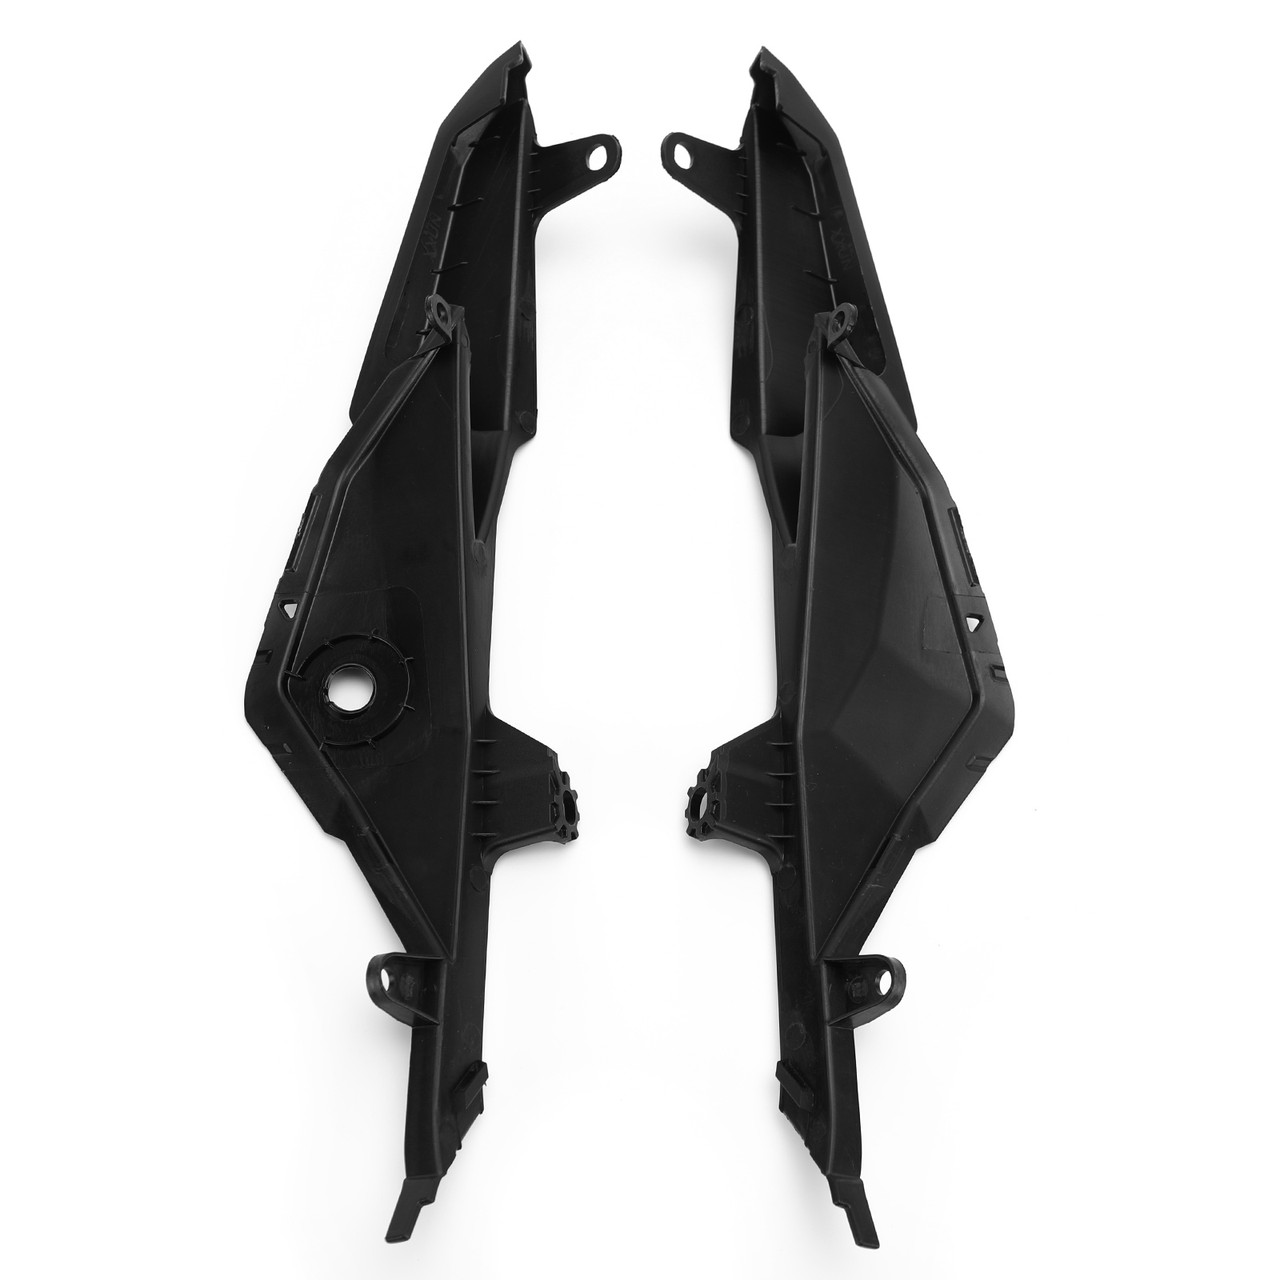 Unpainted ABS Rear Tail Side Seat Panel Fairing Cowl Fit for Honda CB650R/CBR650R 2019-2020 Aftermarket Fairing Part